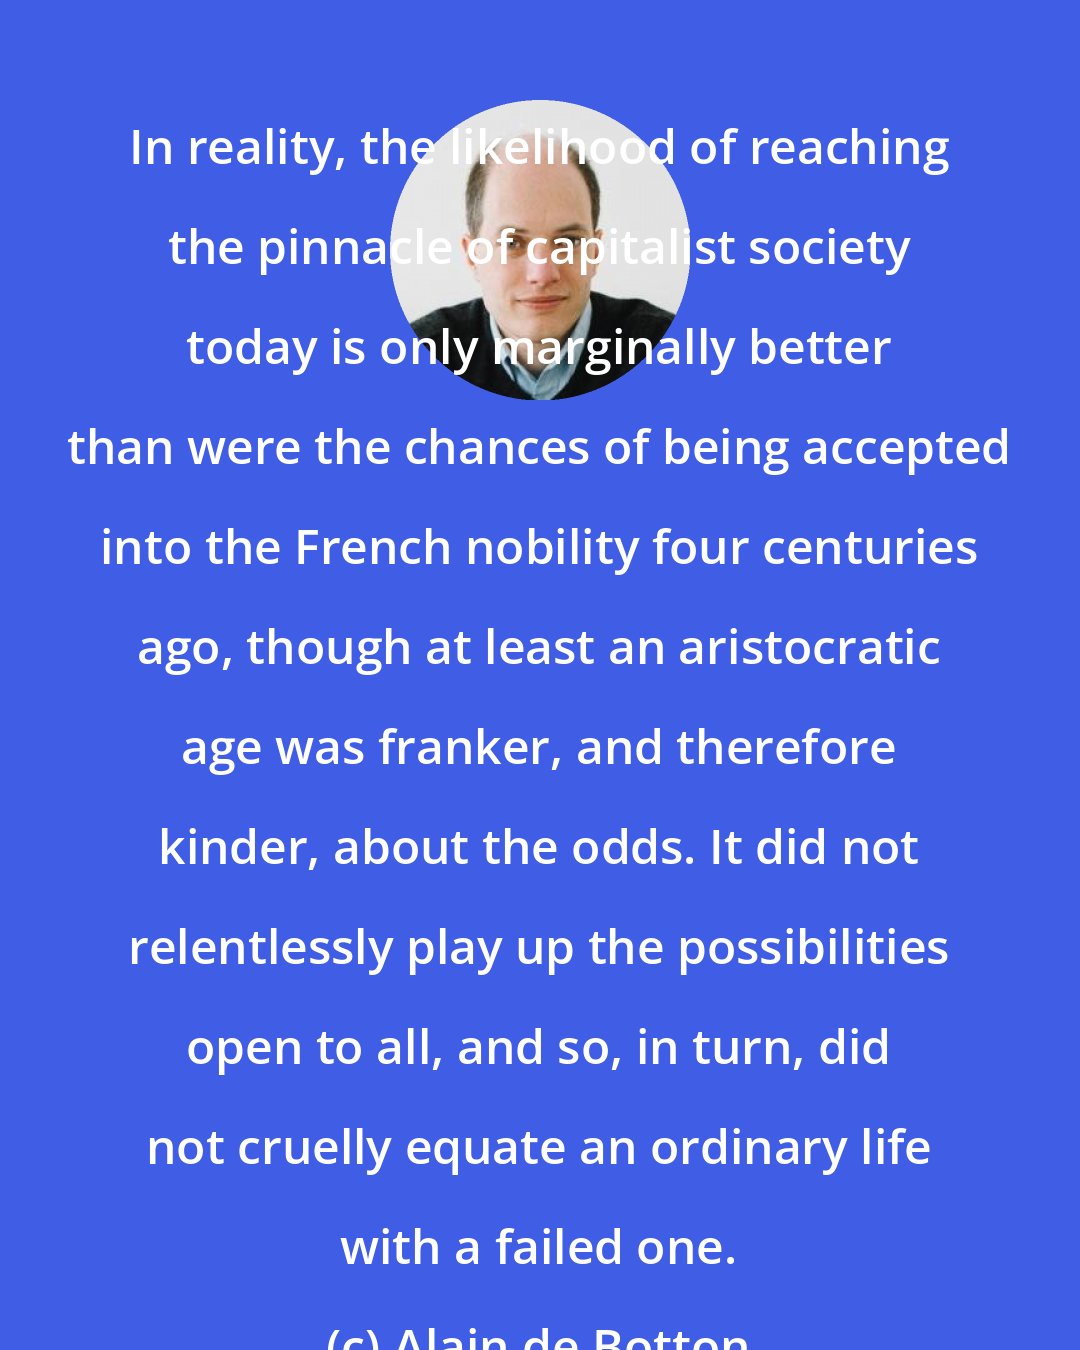 Alain de Botton: In reality, the likelihood of reaching the pinnacle of capitalist society today is only marginally better than were the chances of being accepted into the French nobility four centuries ago, though at least an aristocratic age was franker, and therefore kinder, about the odds. It did not relentlessly play up the possibilities open to all, and so, in turn, did not cruelly equate an ordinary life with a failed one.